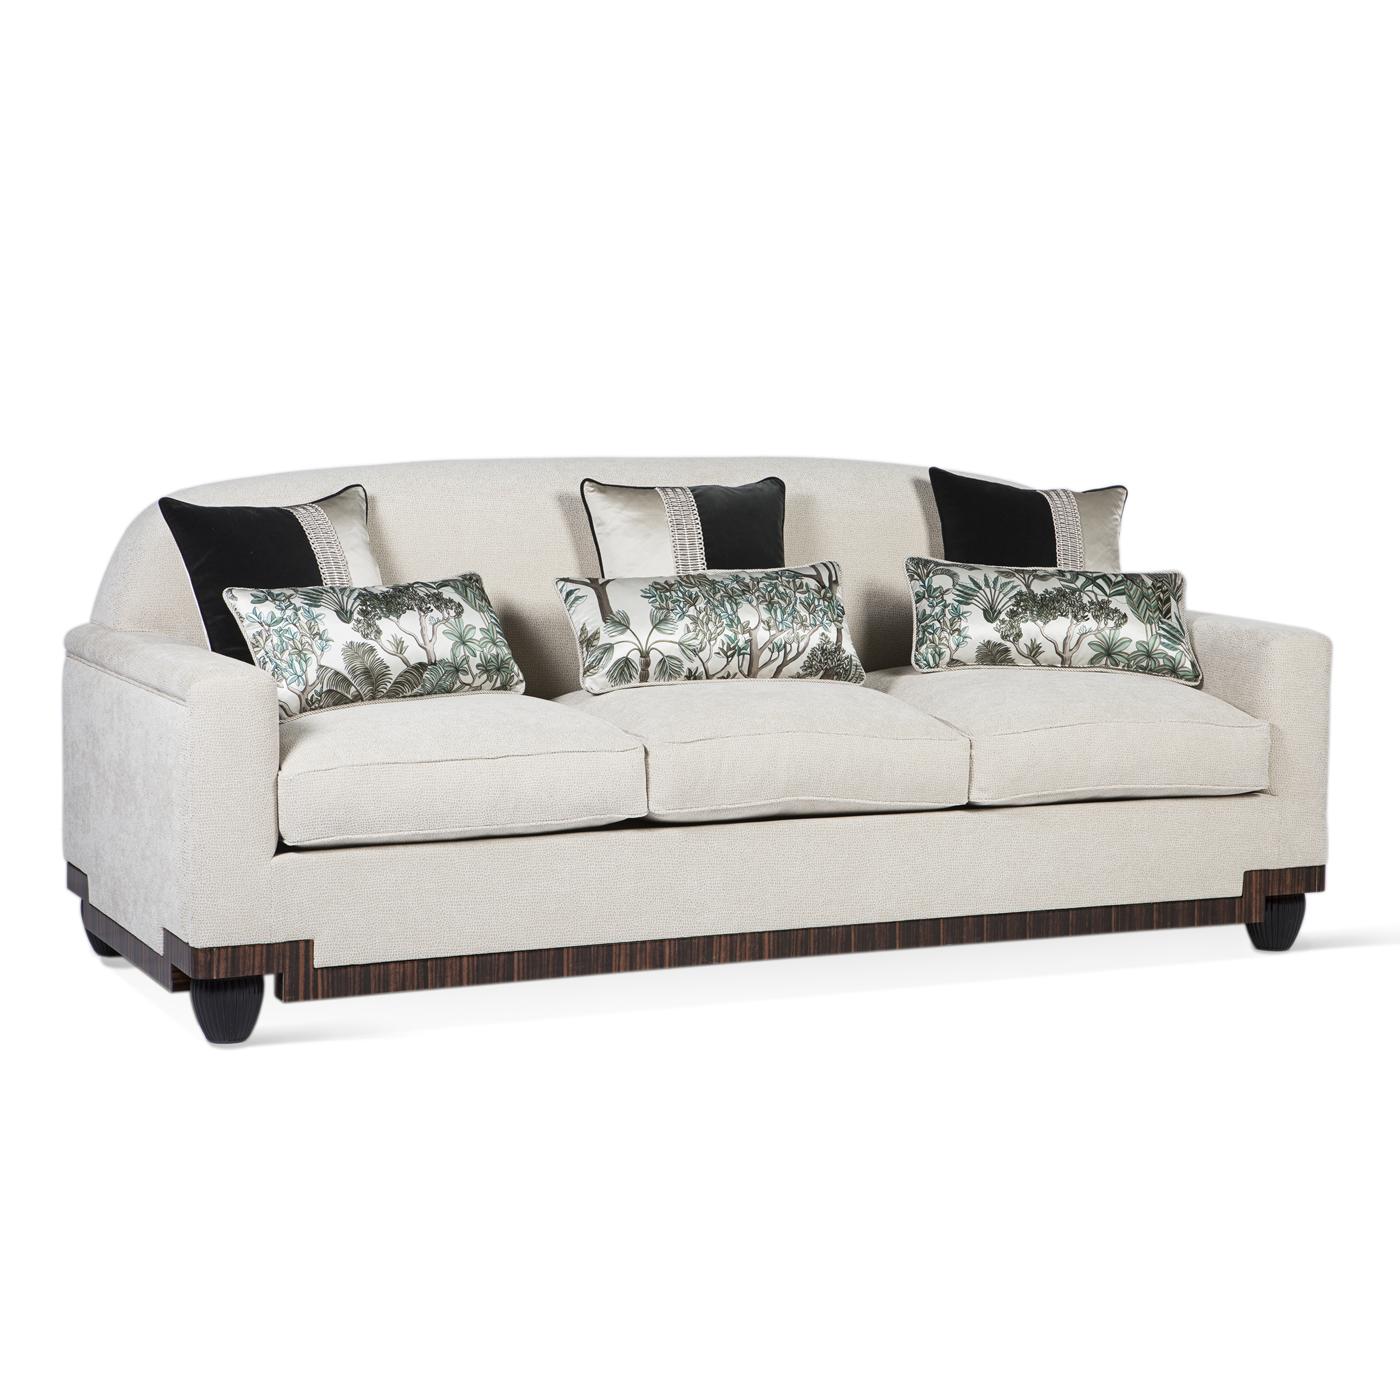 Three-seat sofa upholstered with 3 seat cushions.

   